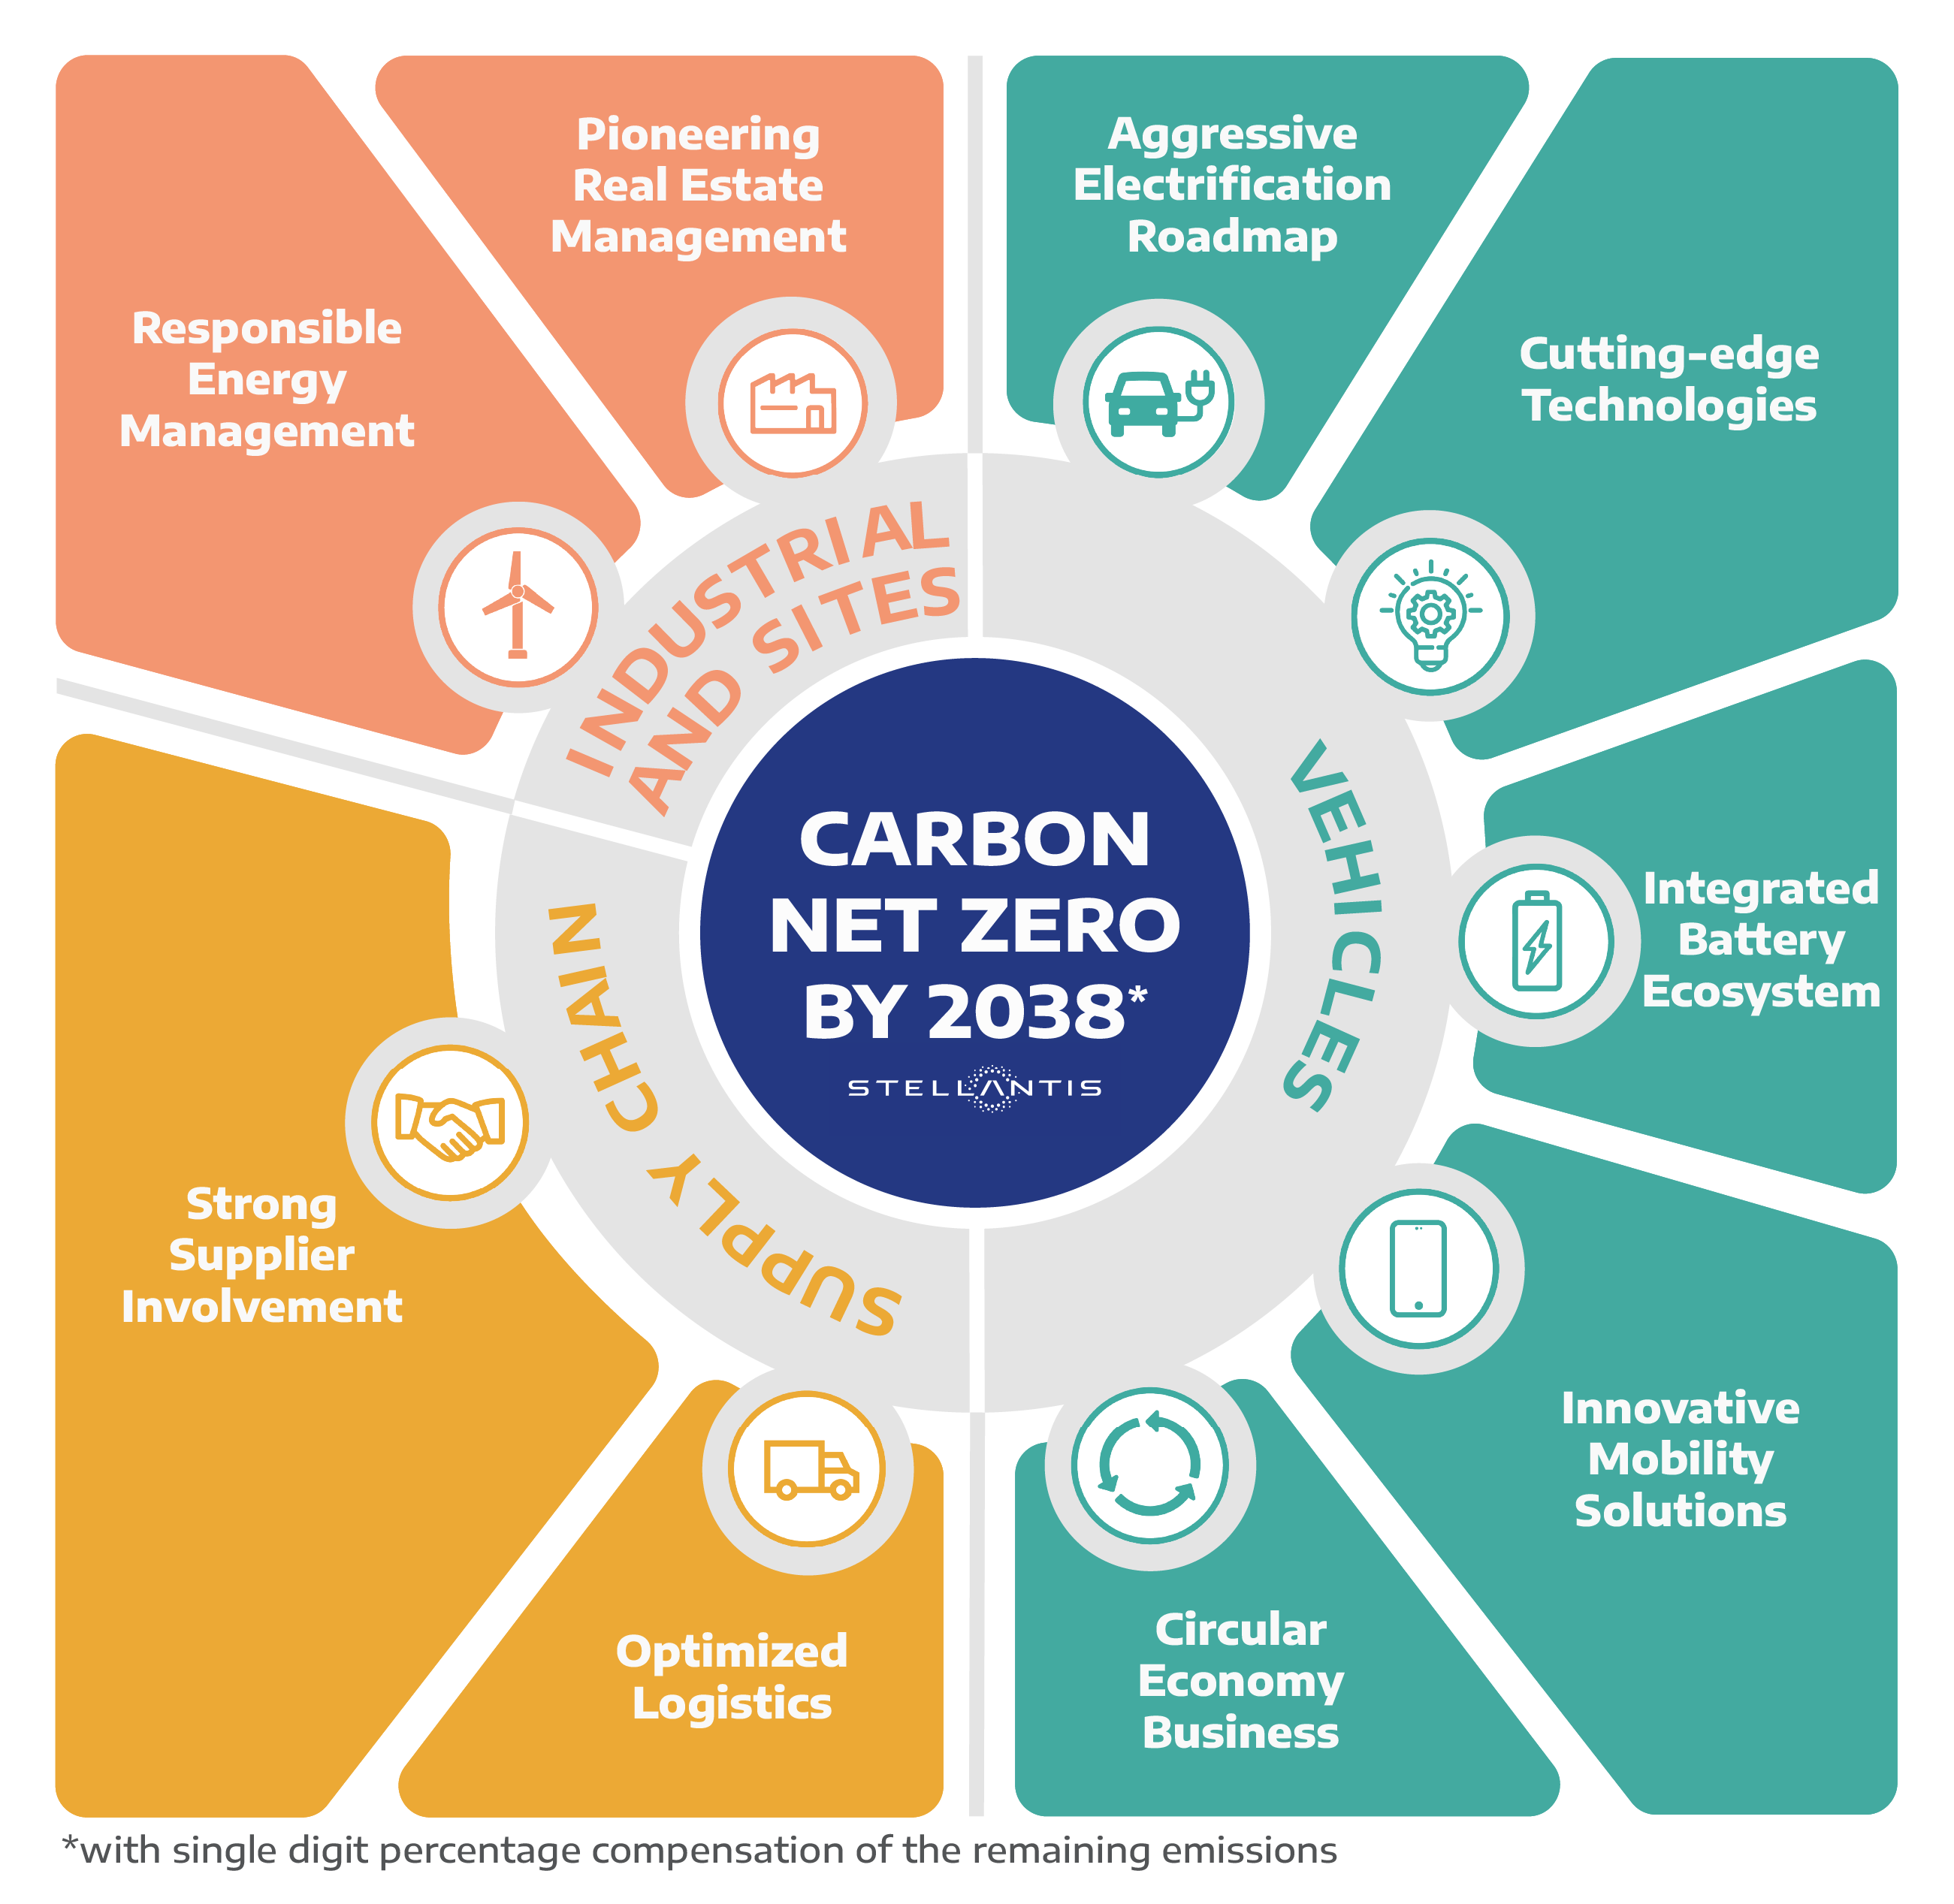 Table of Carbon Net Zero by 2038